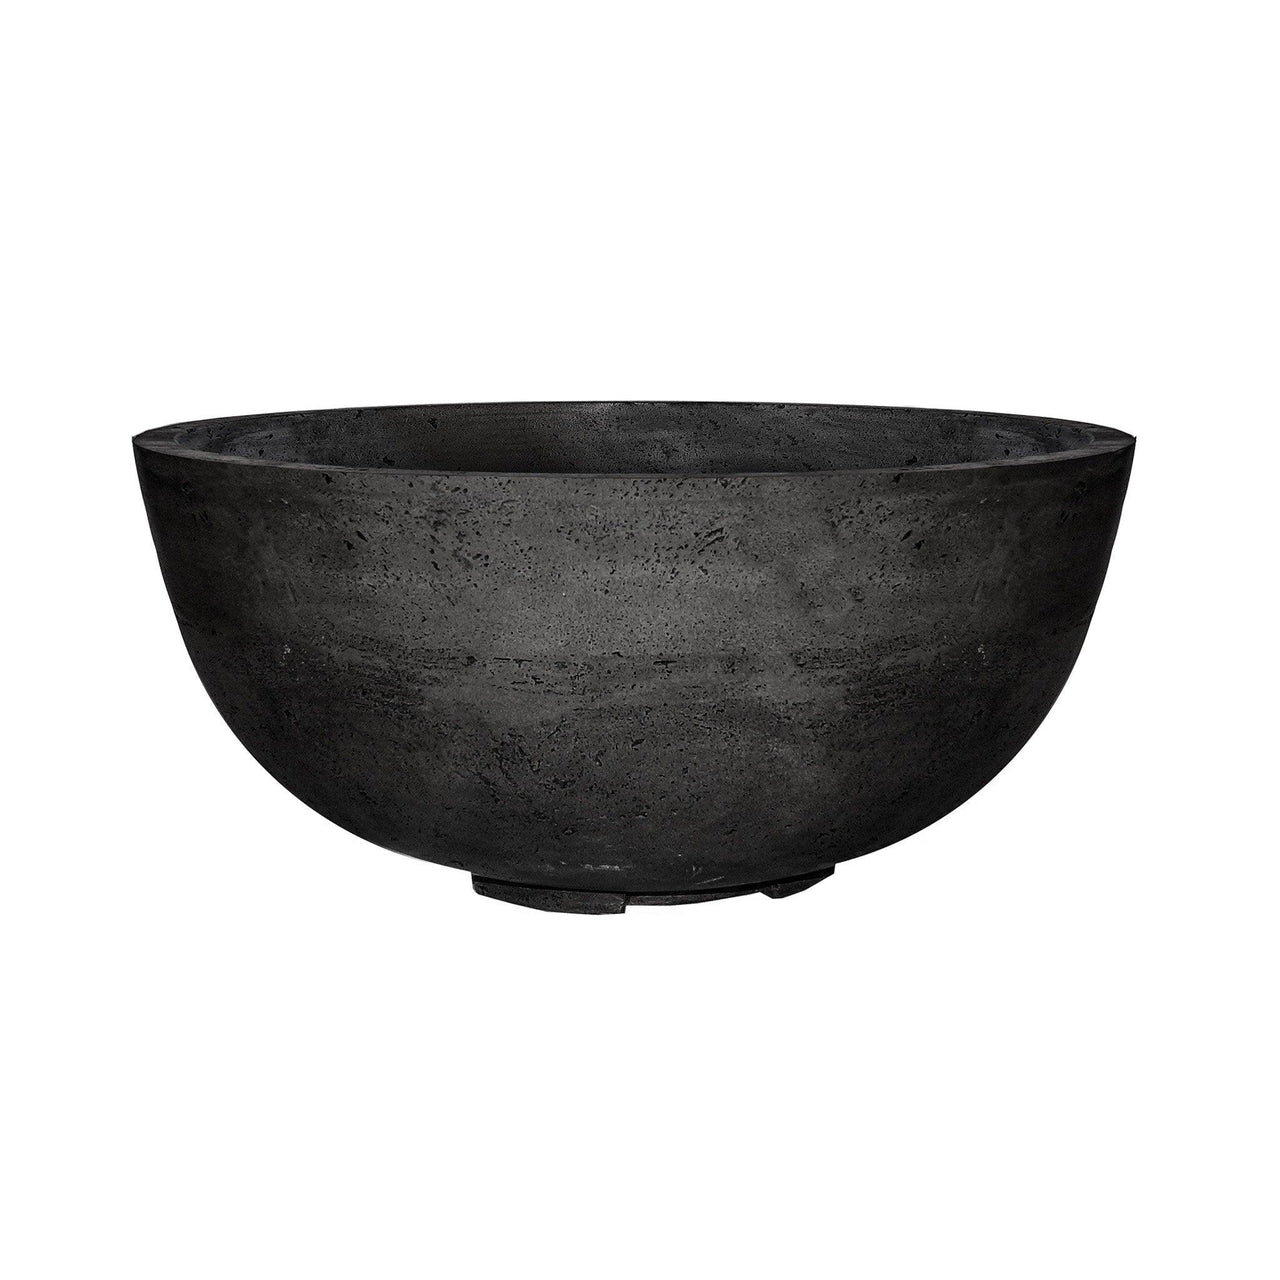 Prism Hardscapes - Moderno Series 1 Round Concrete Fire Bowl - Fire Pit Stock